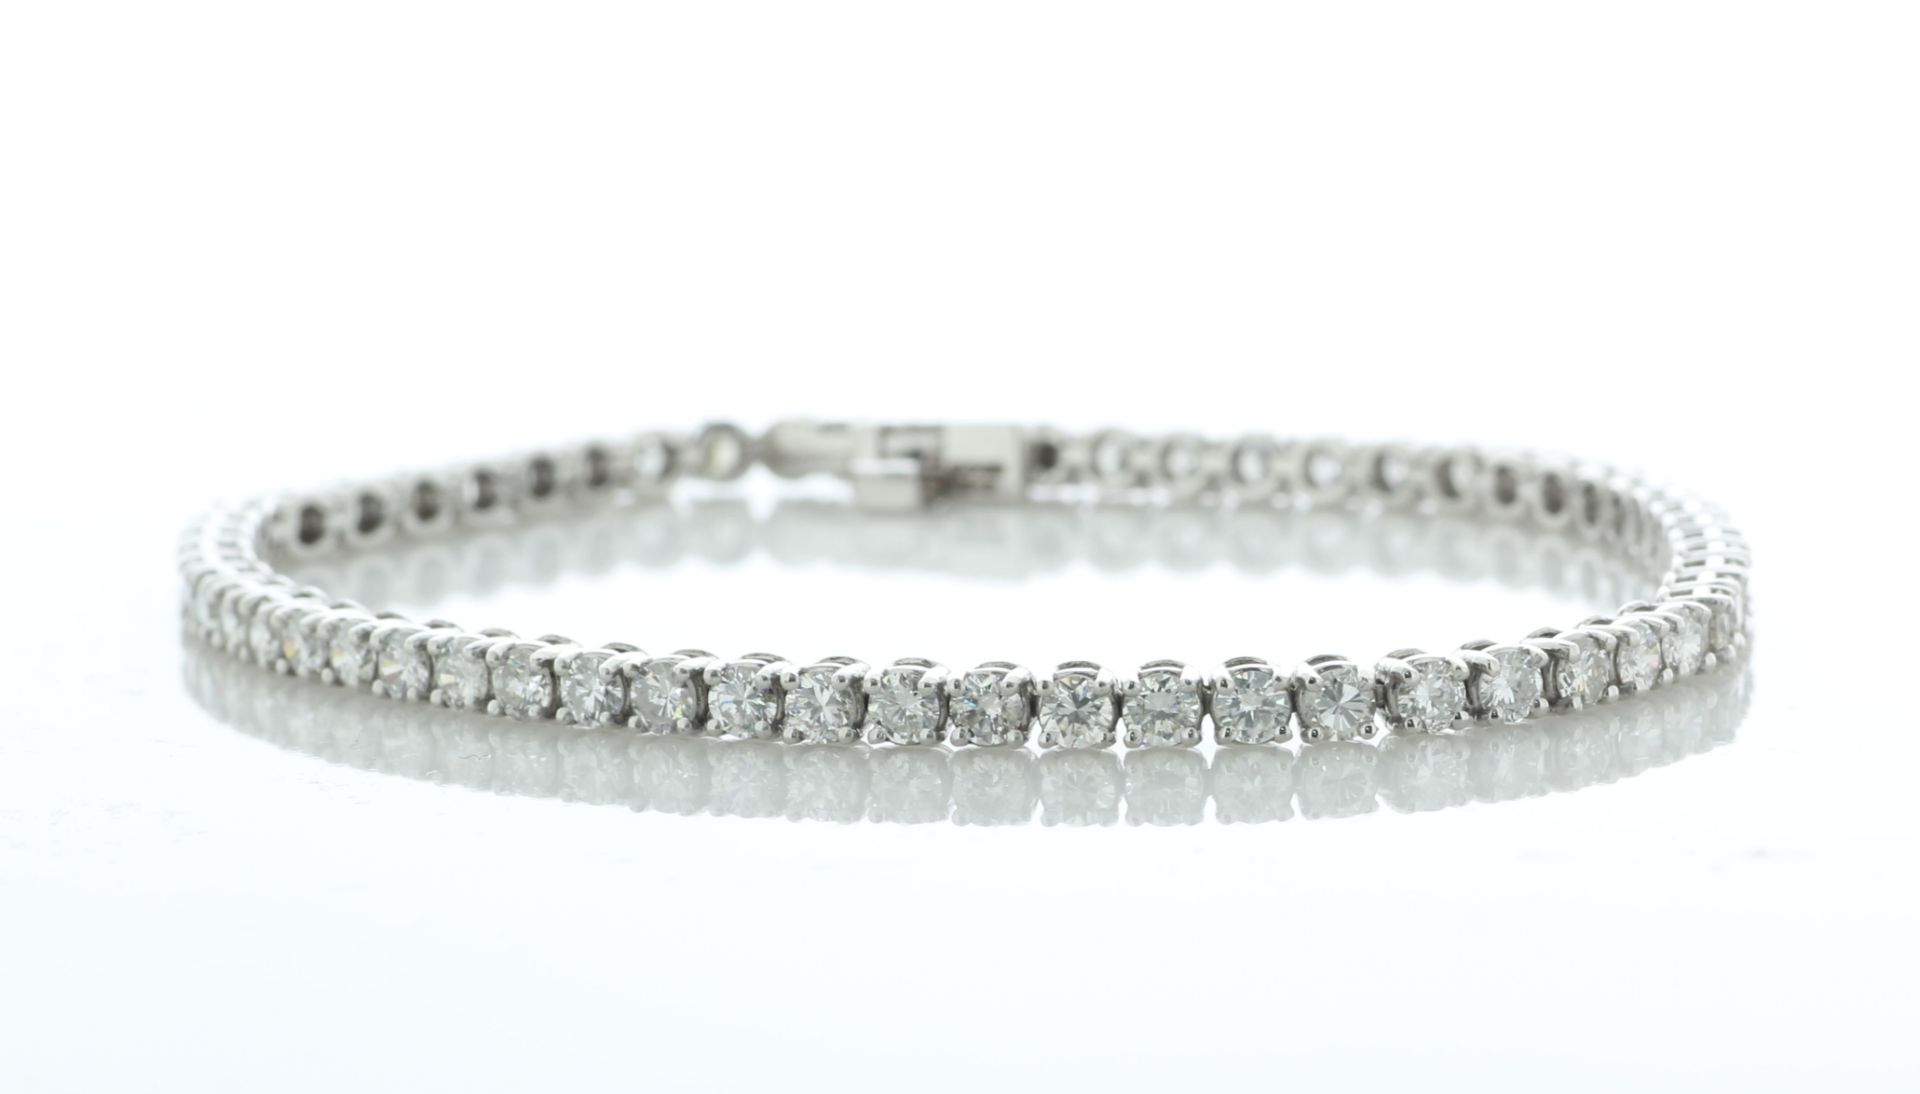 18ct White Gold Tennis Diamond Bracelet 6.89 Carats - Valued By IDI £21,200.00 - Fifty two round